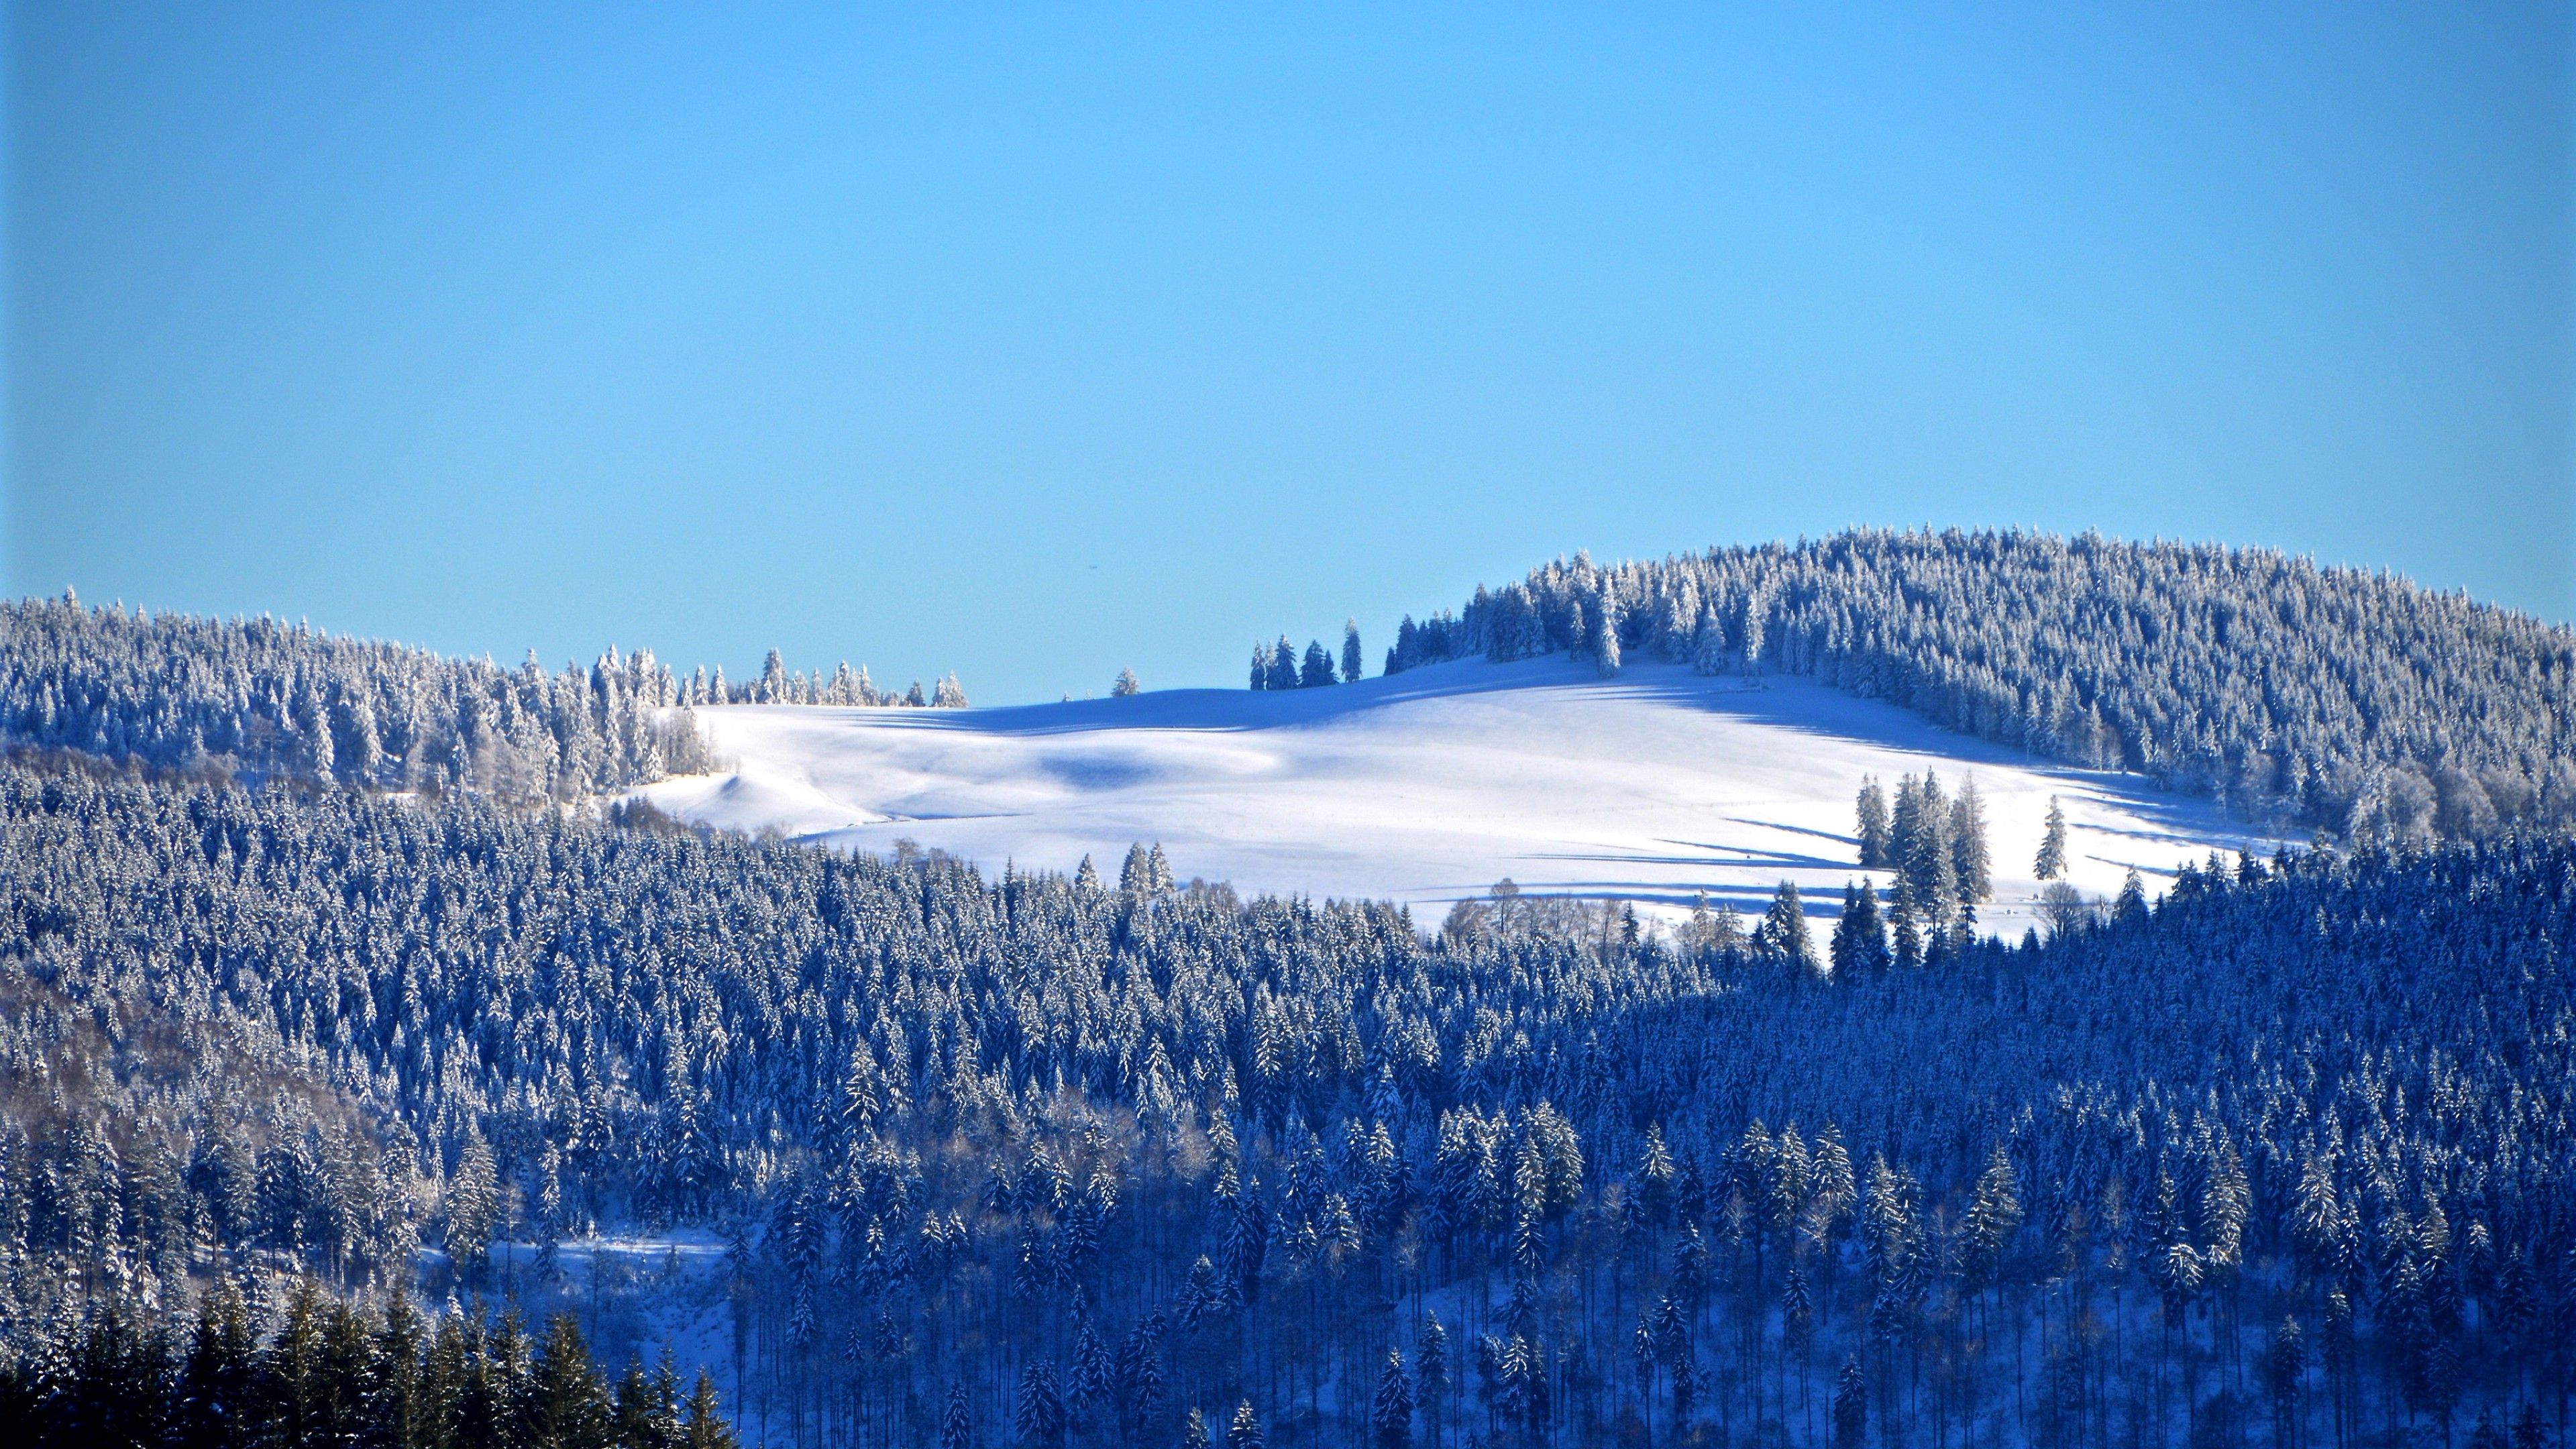 Winter forest 4K Wallpaper, Snow, Trees, Hill, Sky view, Clear sky, Blue sky, Nature